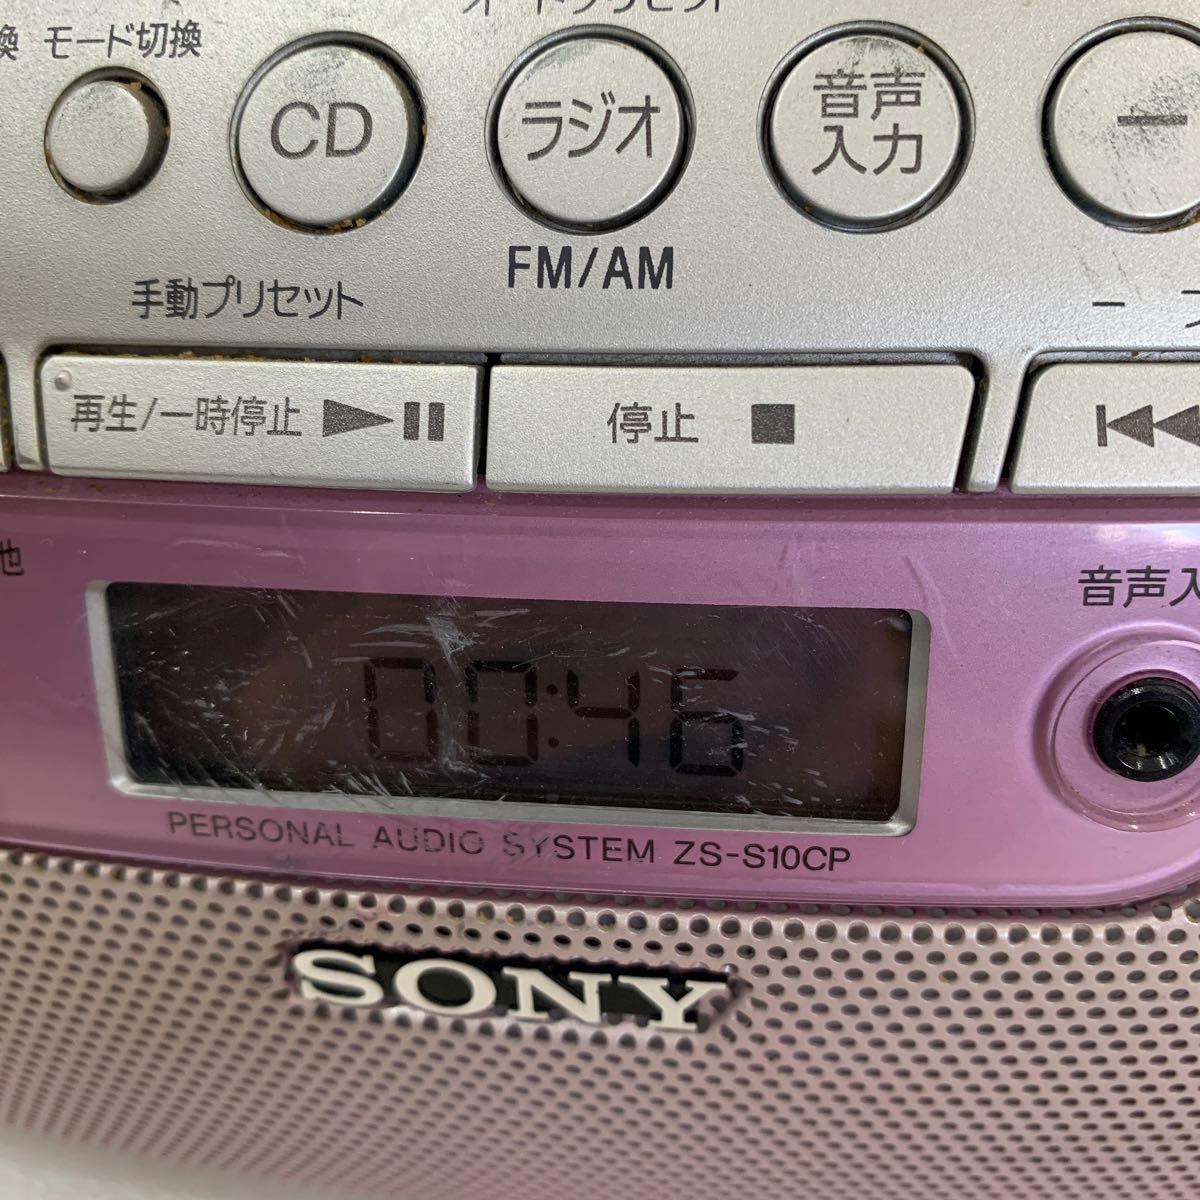 QW3623 SONY Sony ZS-S10CP personal audio system CD radio CD reproduction OK fast forward to coil return OK 0301